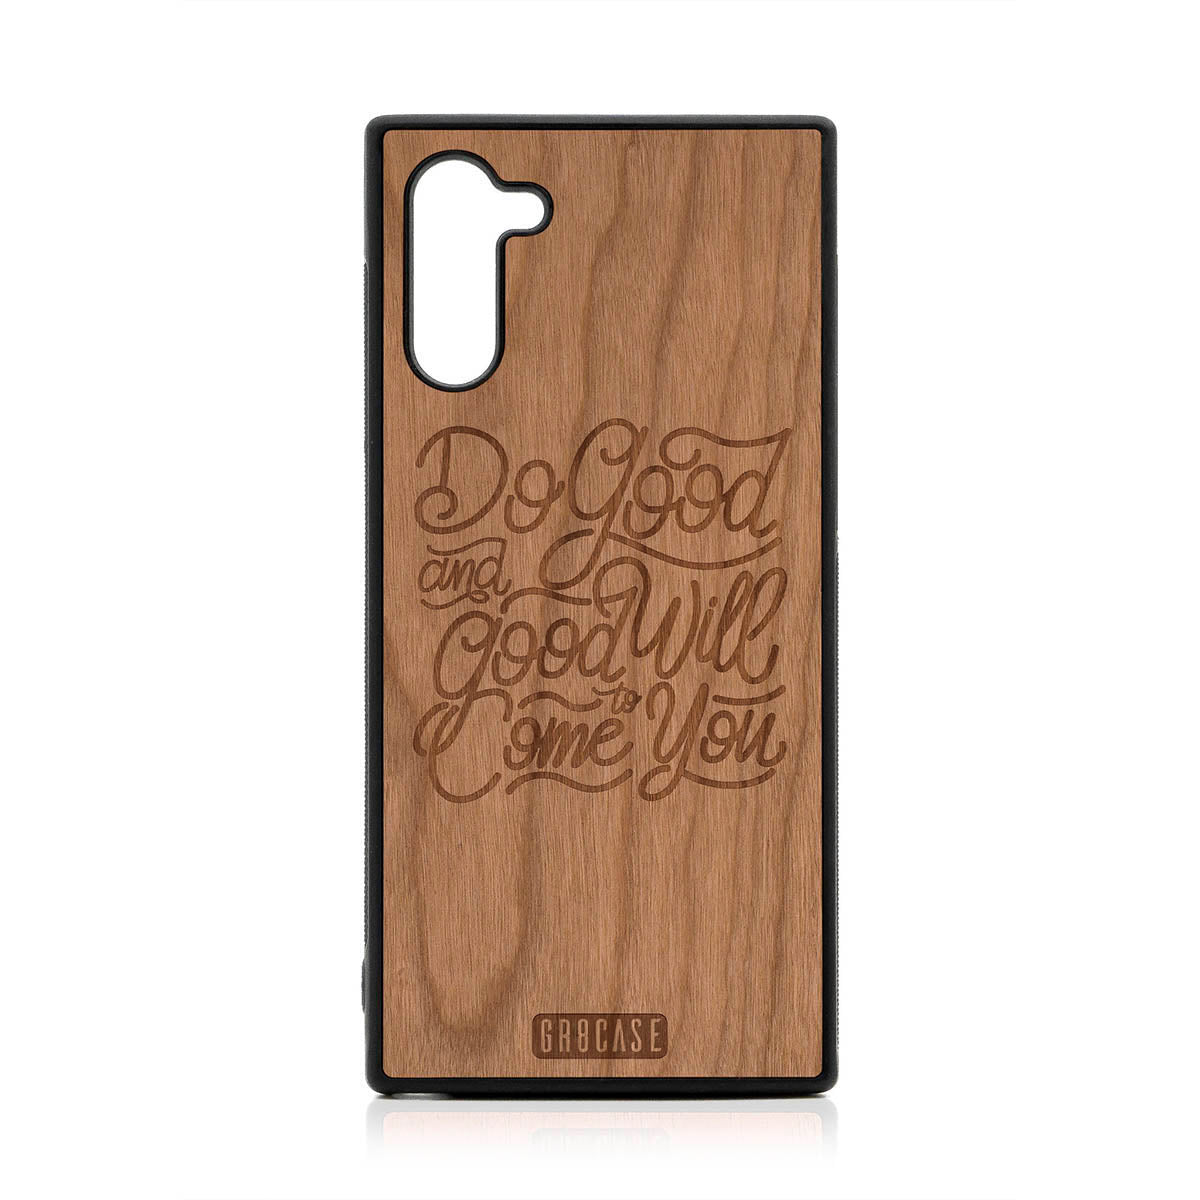 Do Good And Good Will Come To You Design Wood Case For Samsung Galaxy Note 10 by GR8CASE